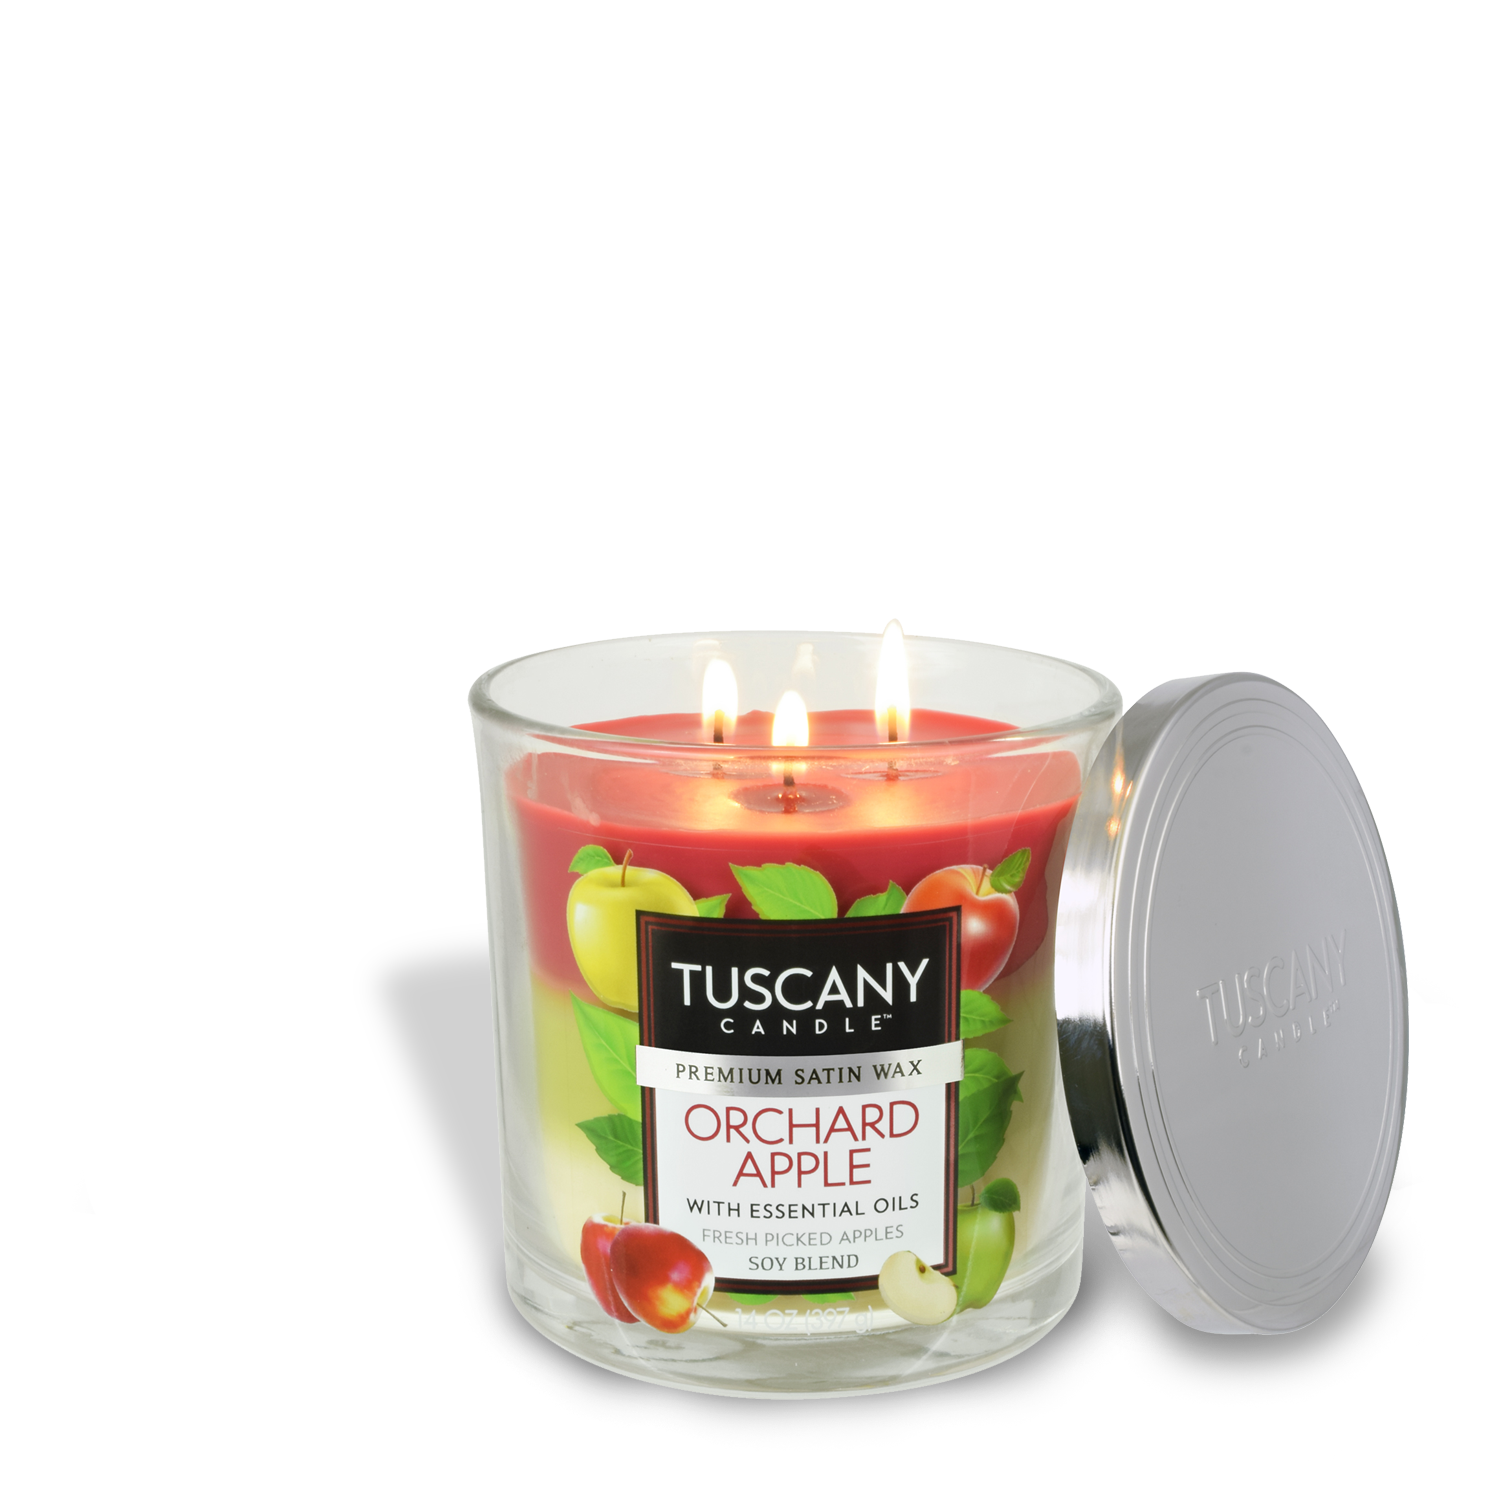 Orchard Apple Long-Lasting Scented Jar Candle (14 oz) by Tuscany Candle® EVD with a delightful apple fragrance.